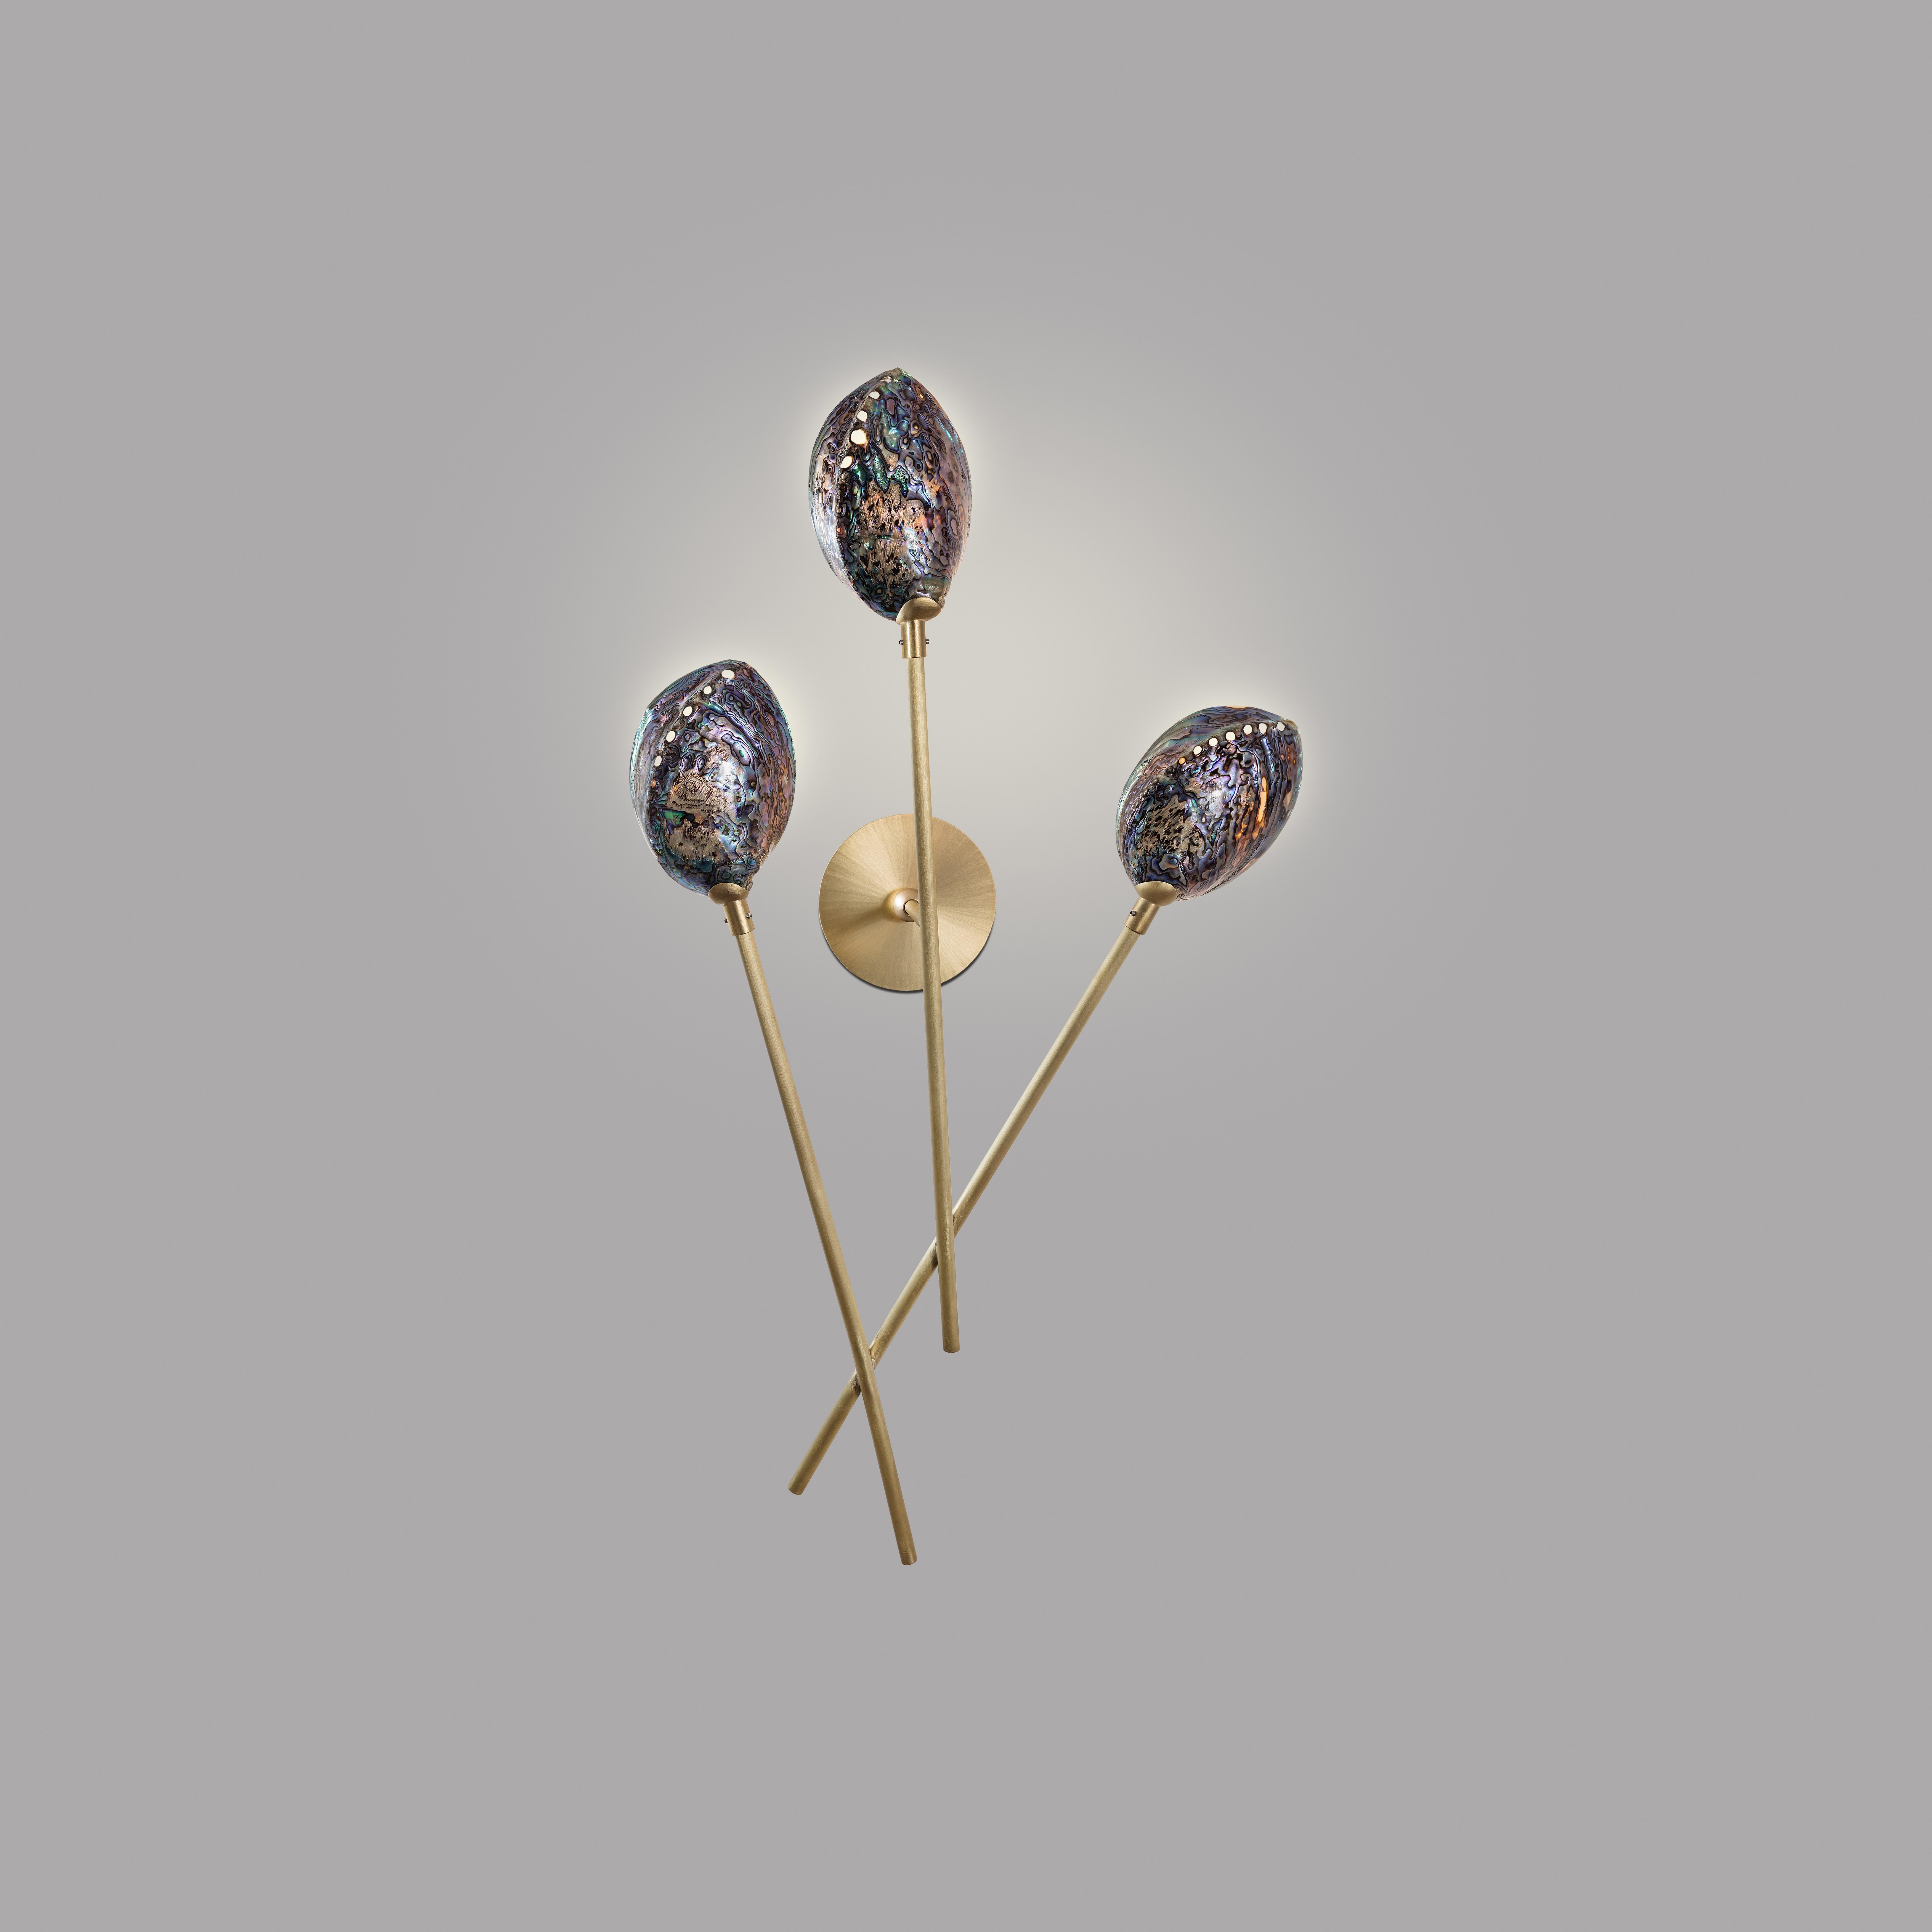 Coquillage wall light III by Ludovic Clément d’Armont
Dimensions: D 14 x W 47 x H 80 cm
Materials: Shell, brass.

Ludovic Clément d’Armont is in the continuation of a family tradition of centuries of gentle glassmakers, painters, carpenters and